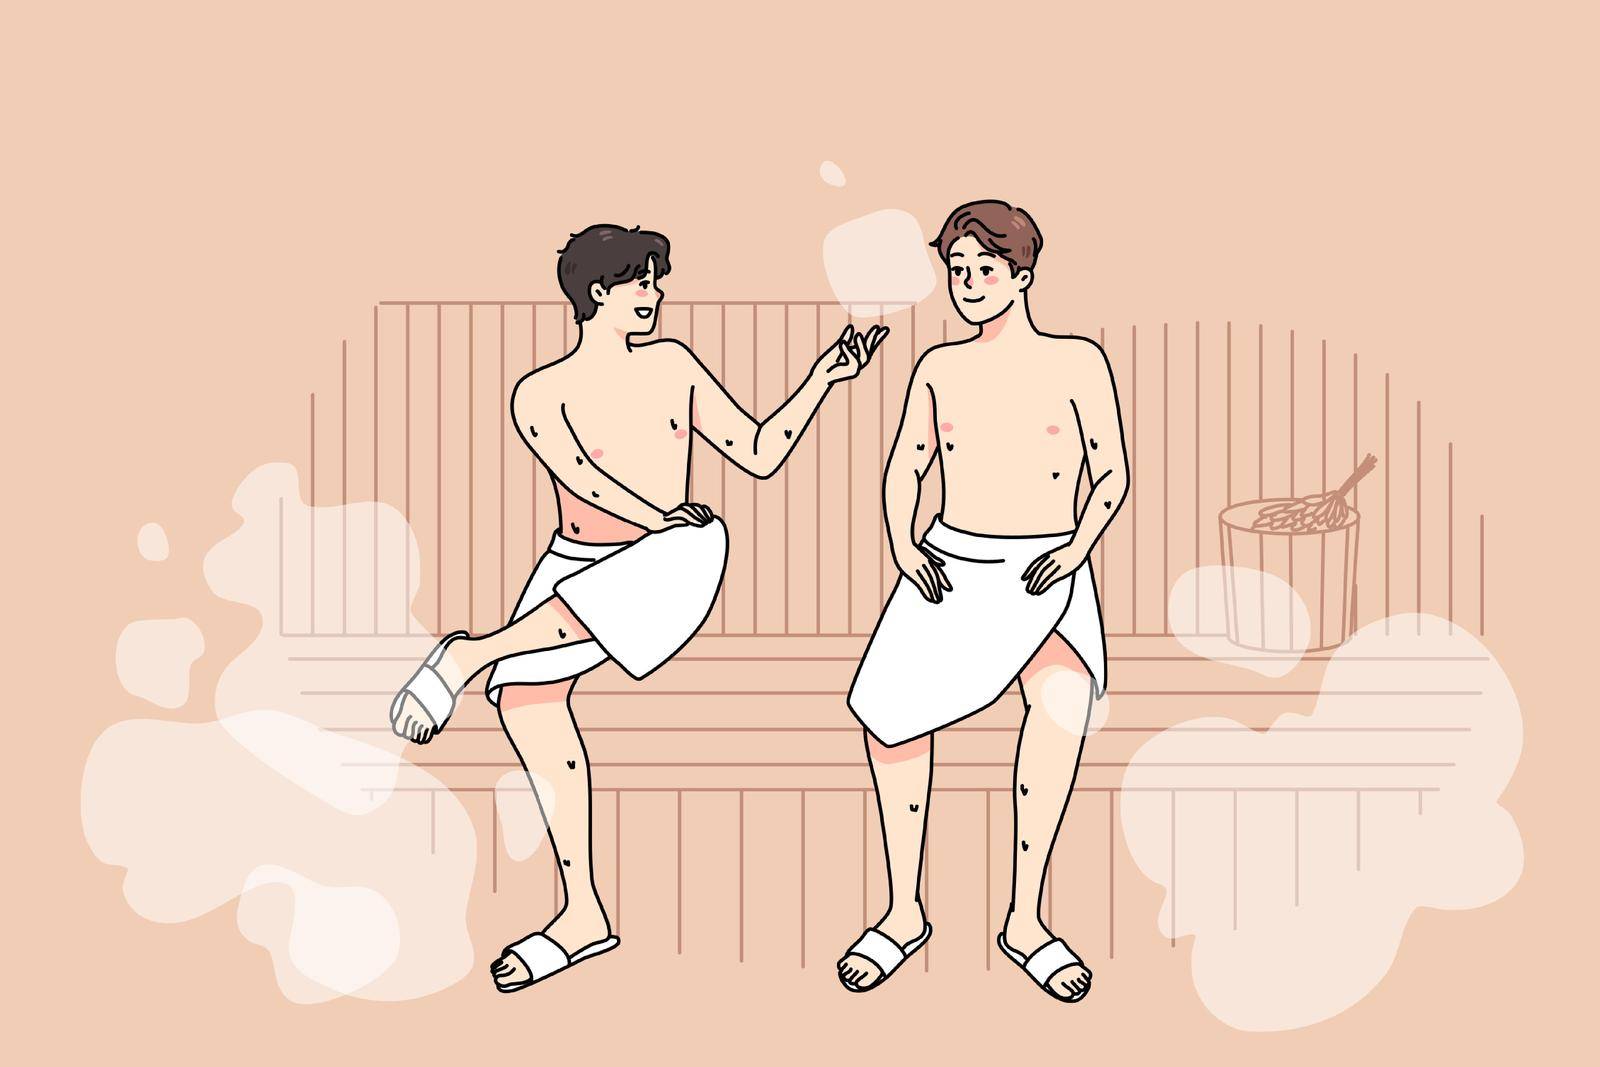 Happy male friends in towels relax in sauna on weekend together. Smiling men enjoy bathhouse relaxation, rest in spa or wellness center. Relaxation and recreation. Vector illustration.